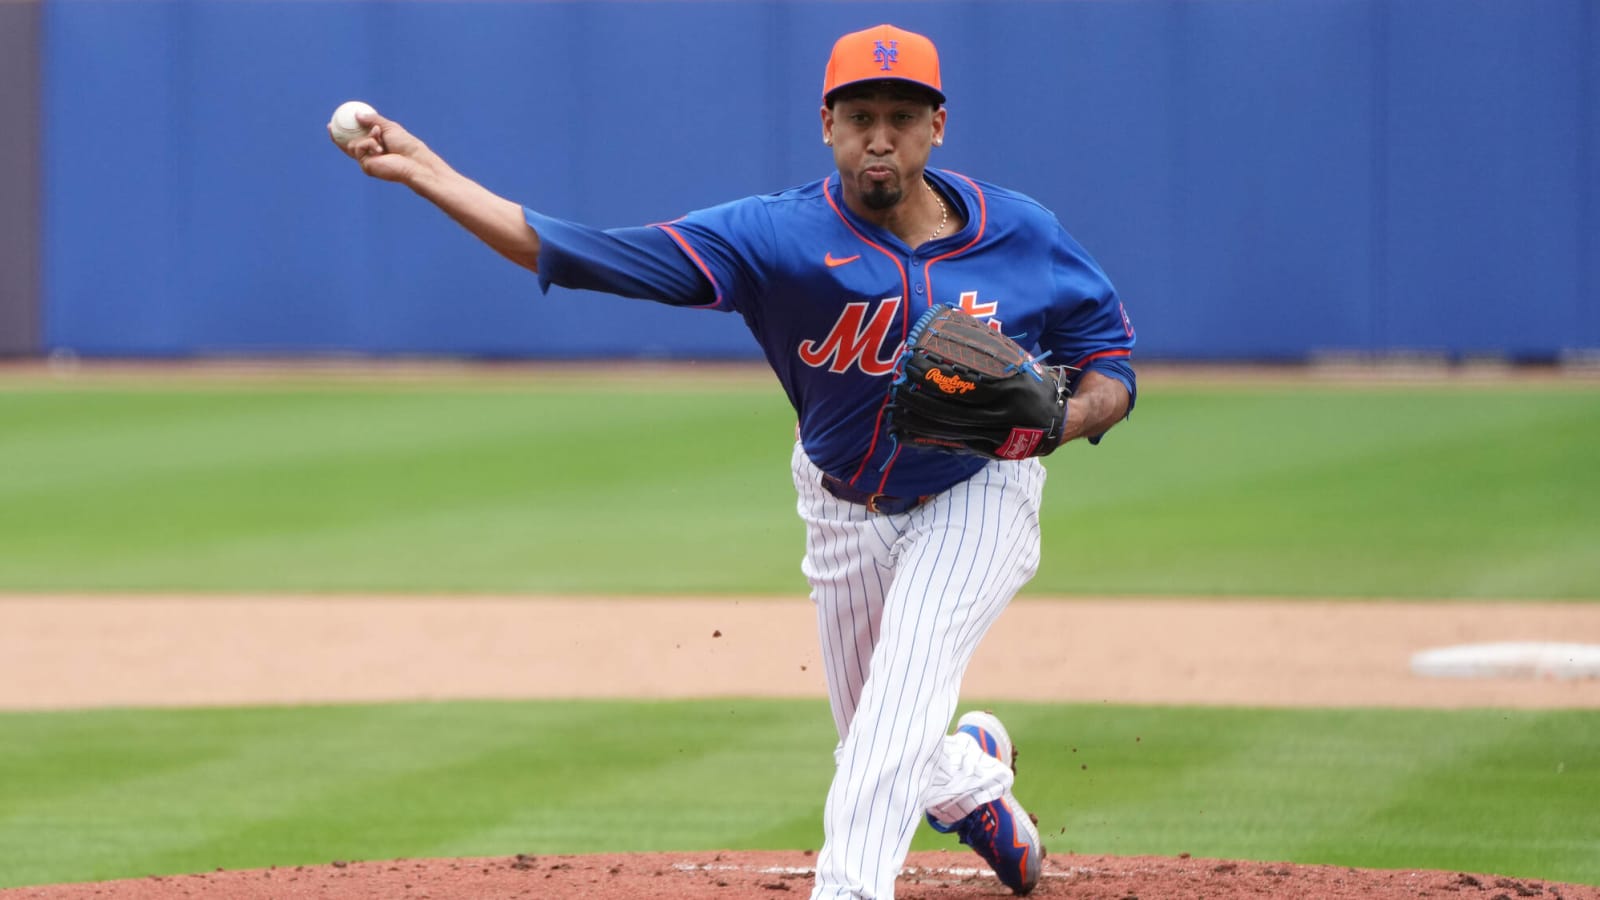 Mets’ Edwin Diaz nearing 100% after promising Spring Training intrasquad game